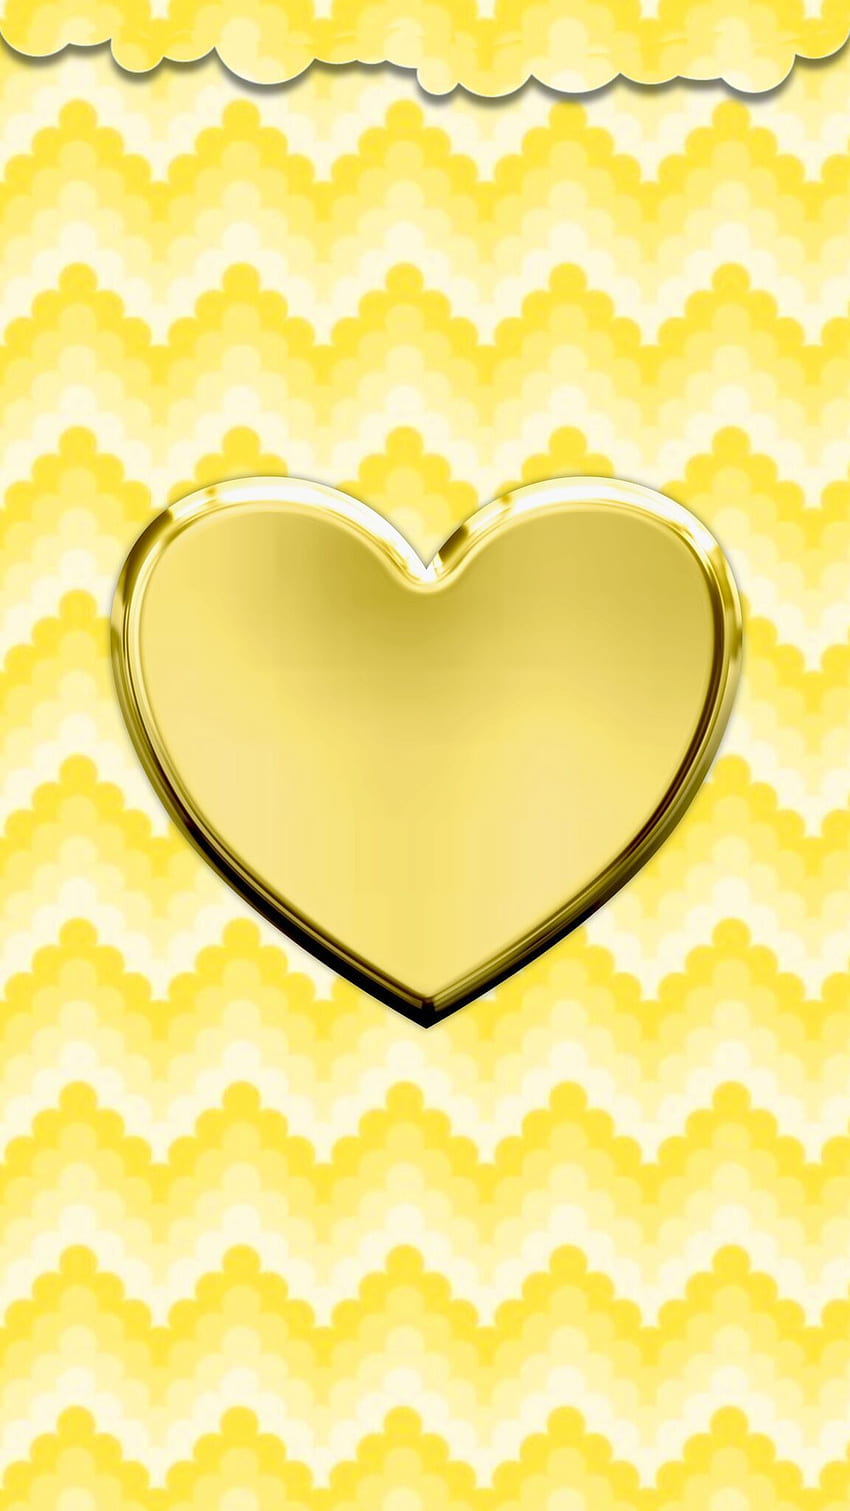 HD wallpaper: yellow hearts wallpaper, background, gold, backgrounds,  abstract | Wallpaper Flare